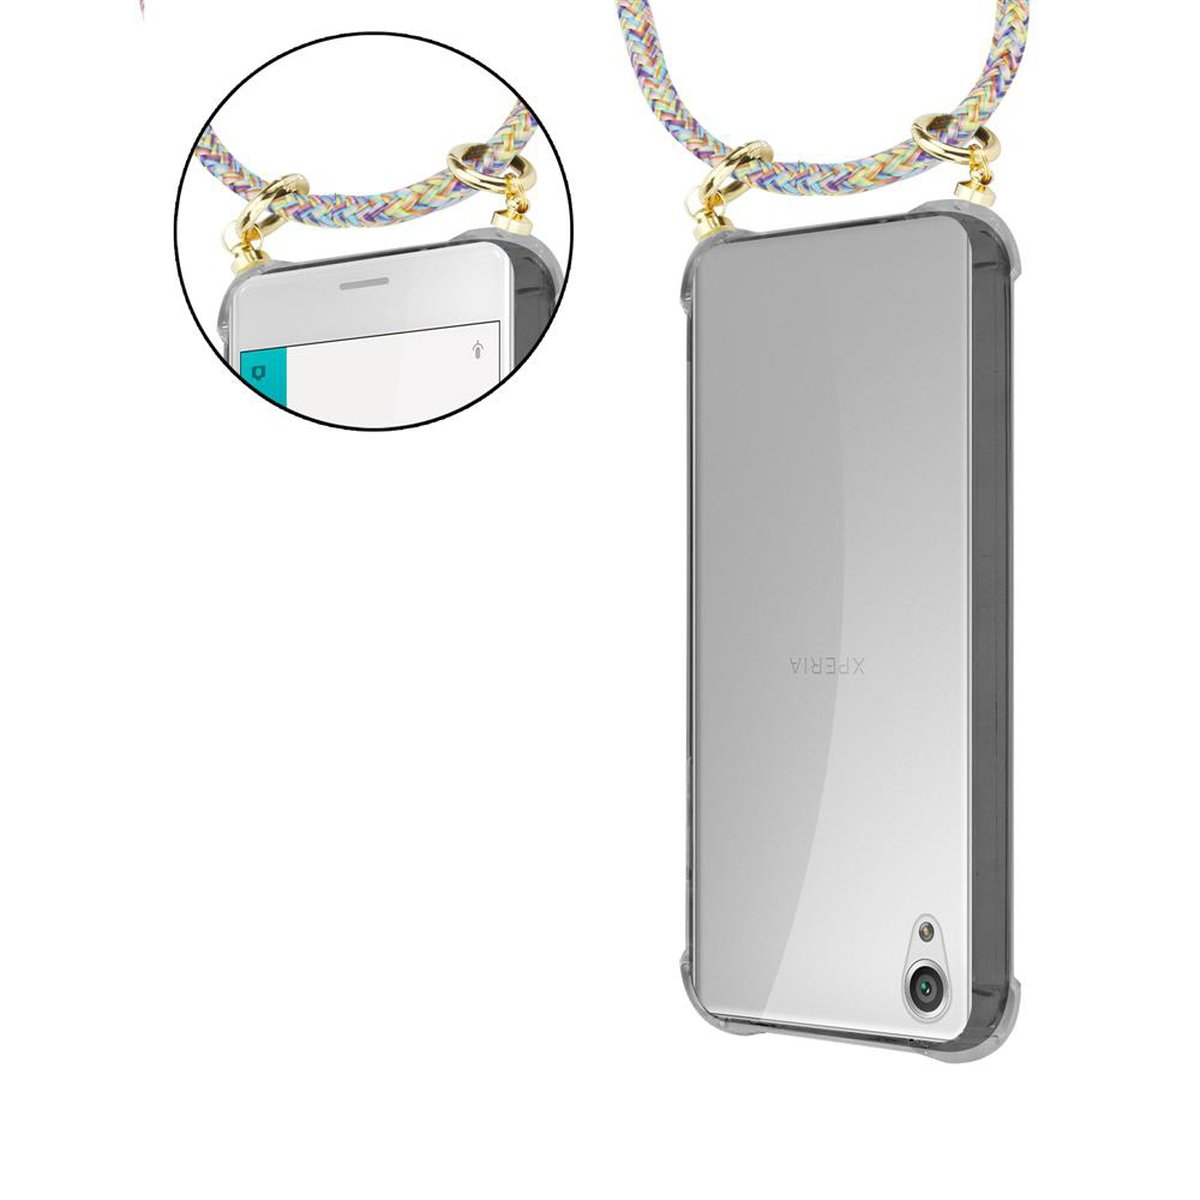 Hülle, Handy CADORABO mit Xperia Band Kordel Ringen, X, und Gold Kette Sony, RAINBOW abnehmbarer Backcover,